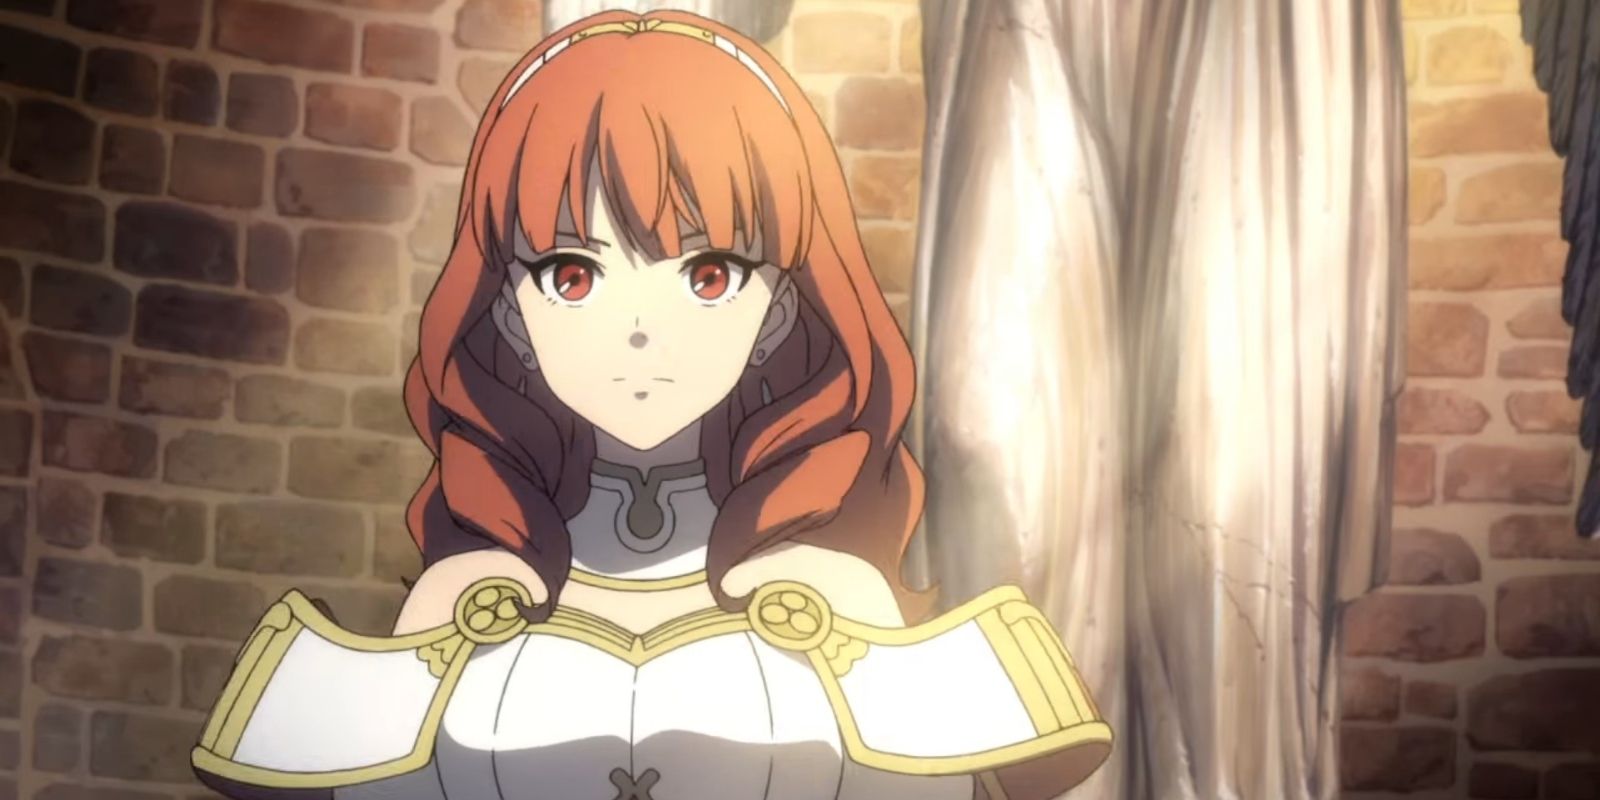 Celica from Fire Emblem Echoes